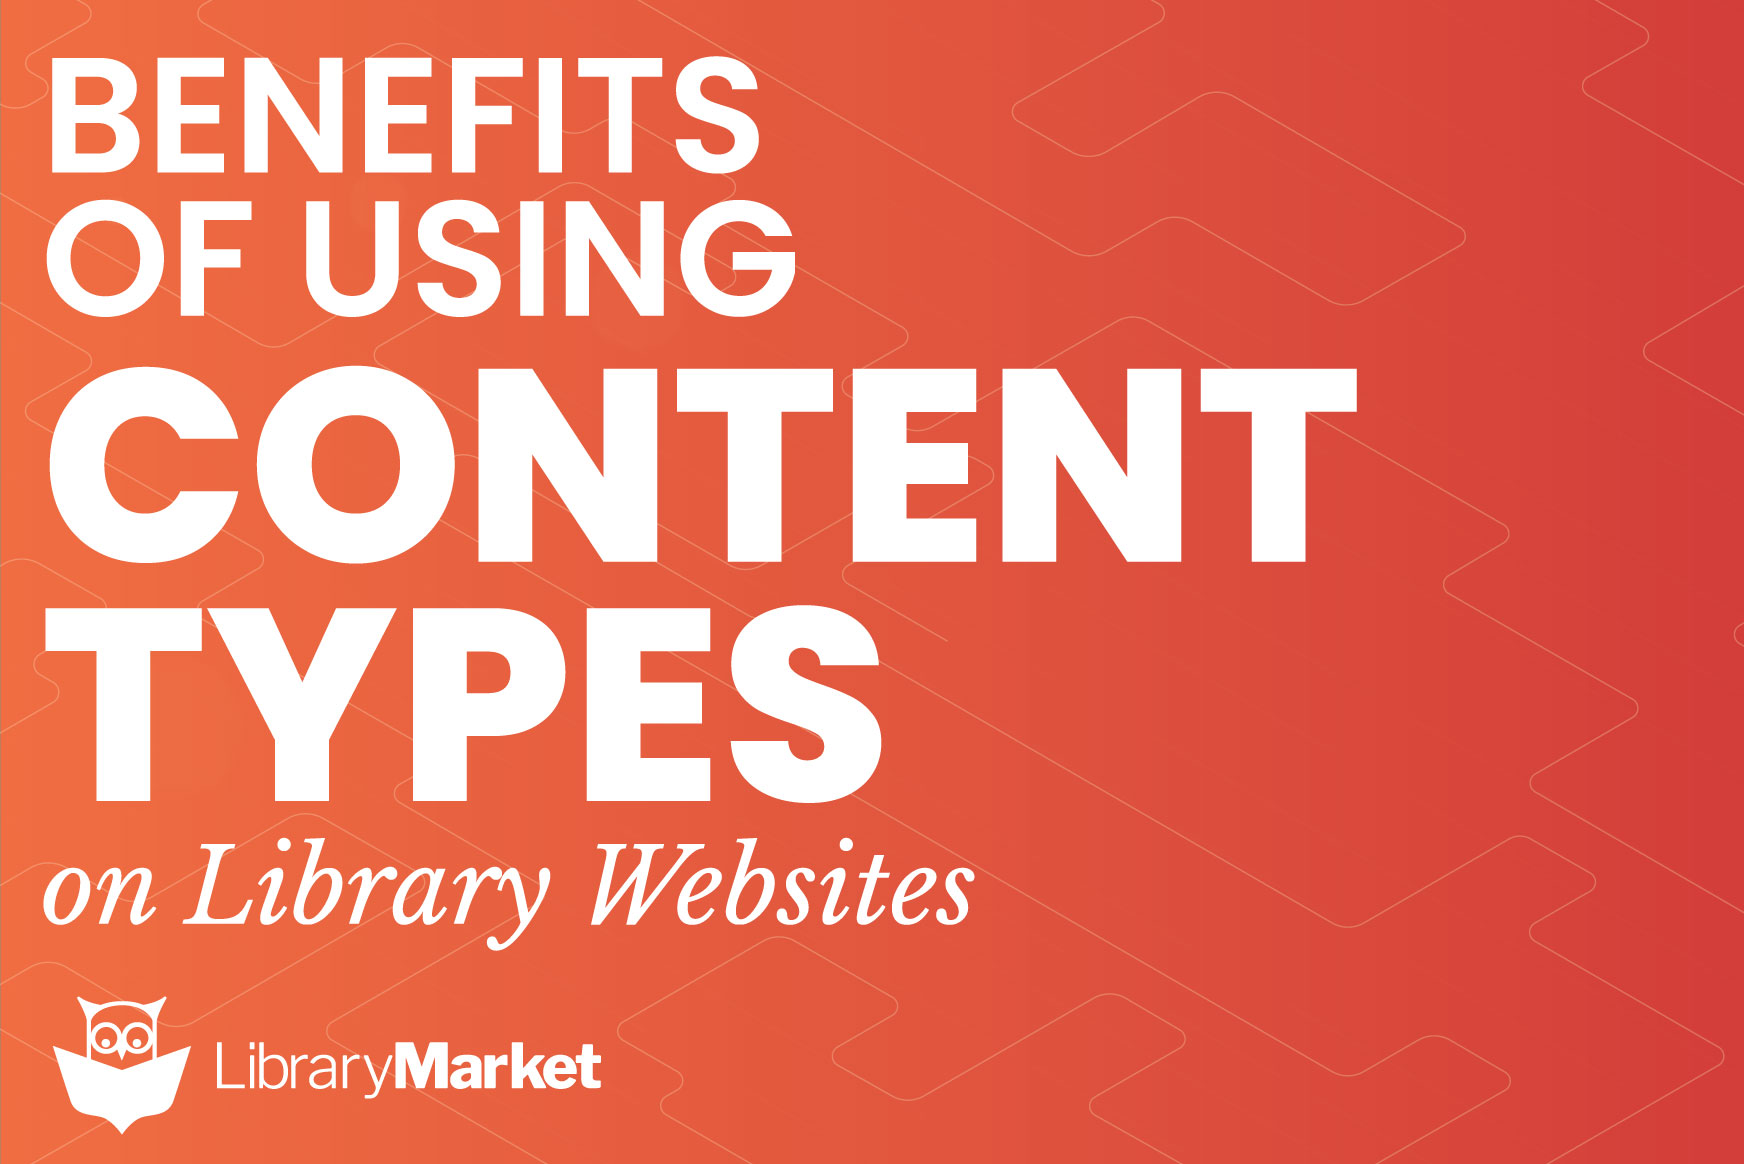 Benefits of Using Content Types on Library Websites